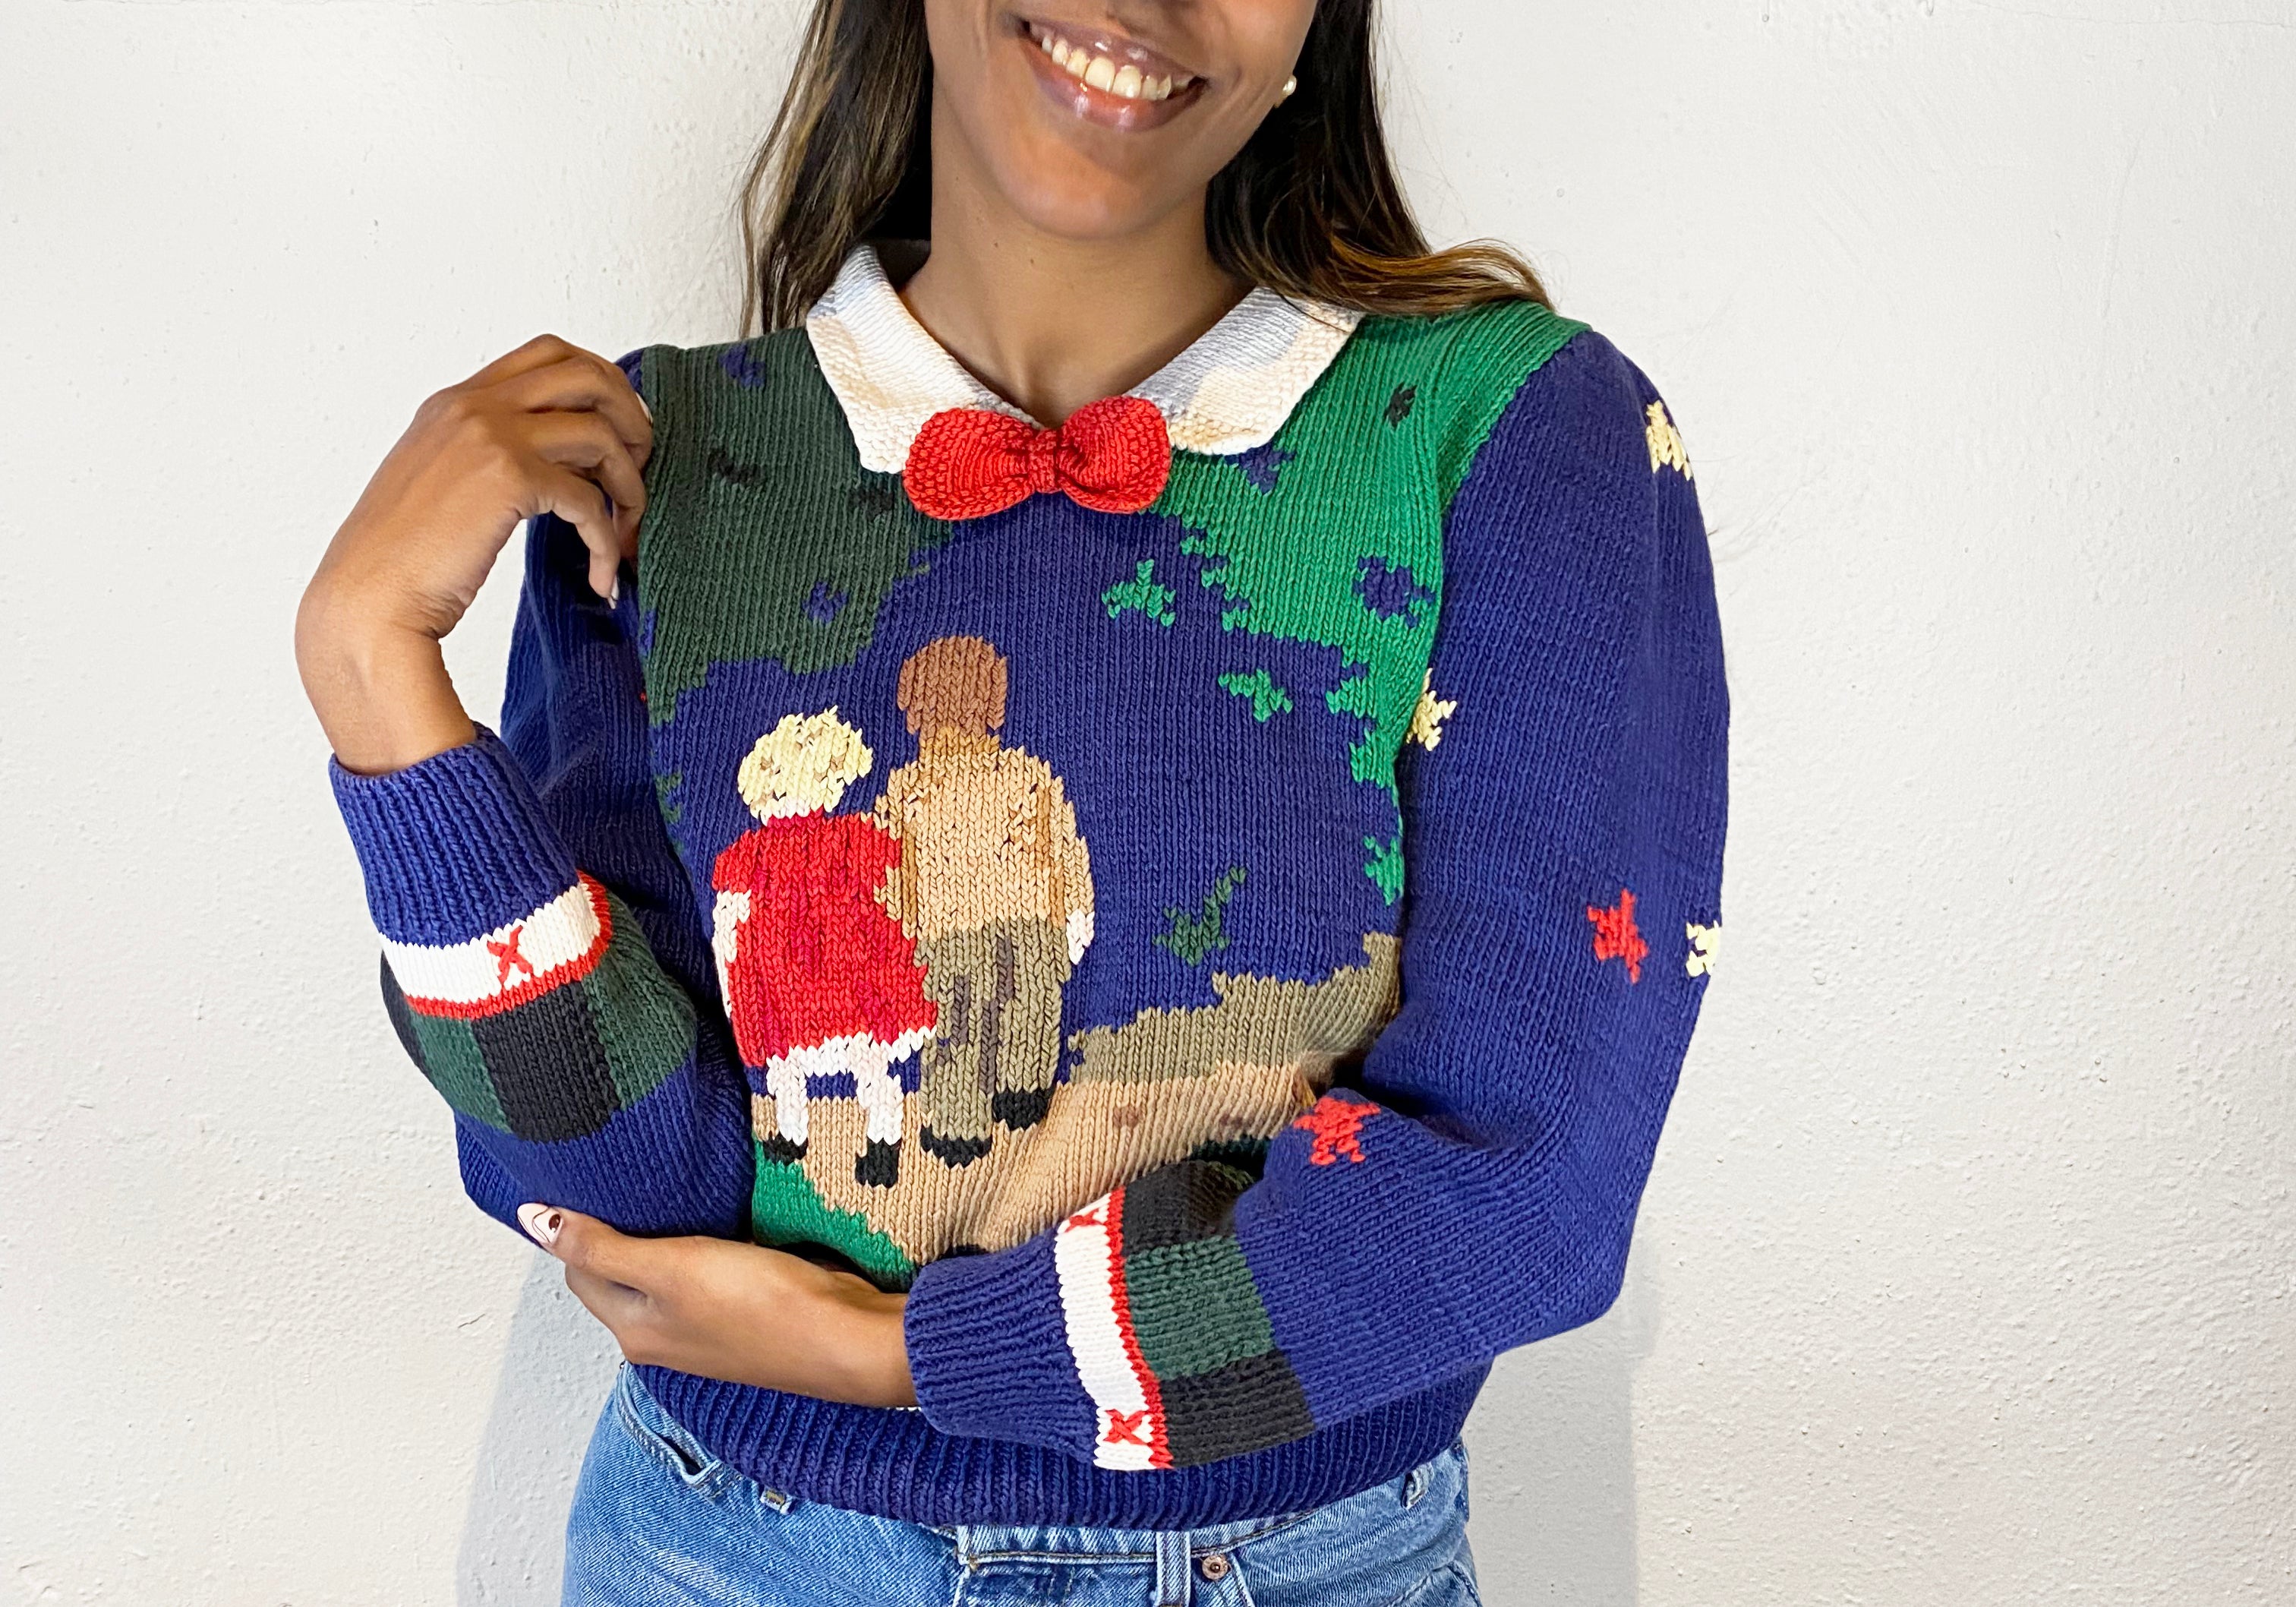 Vintage Bow Tie Holiday Sweater